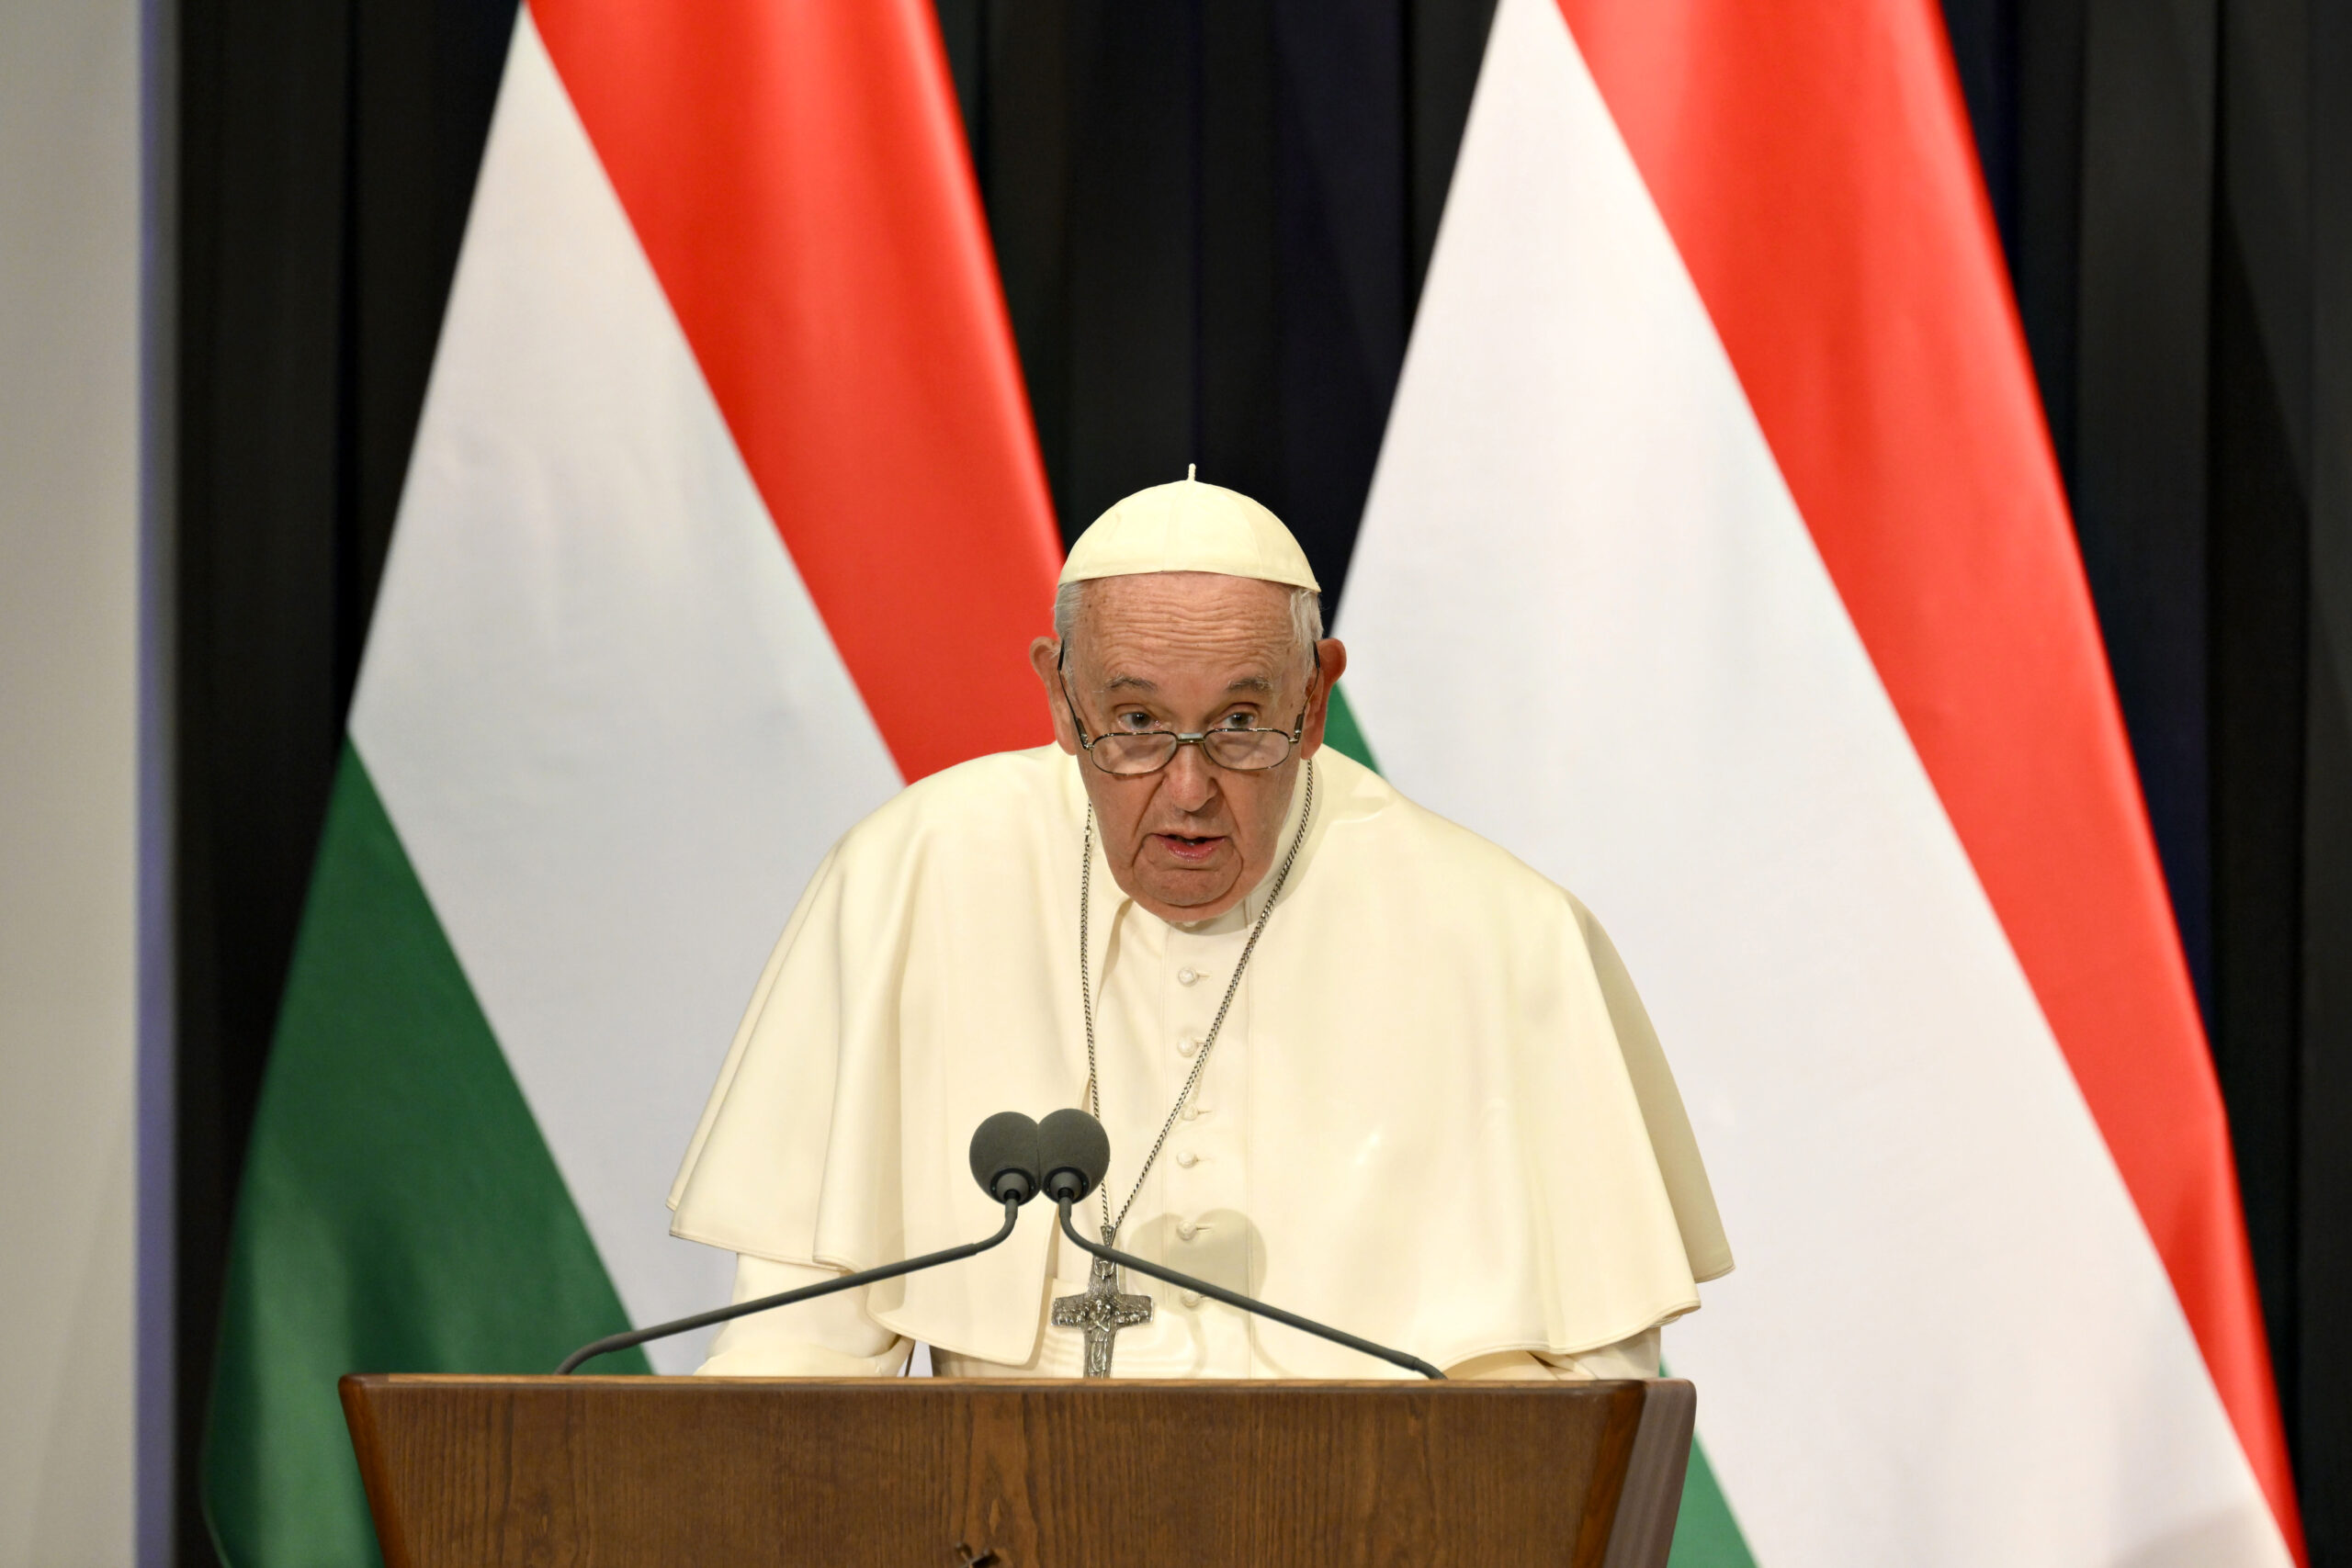 Pope Francis Condemns Gender Ideology As ‘Nefarious Path’ That Leads To ‘Tragic Defeat’ During Hungary Visit